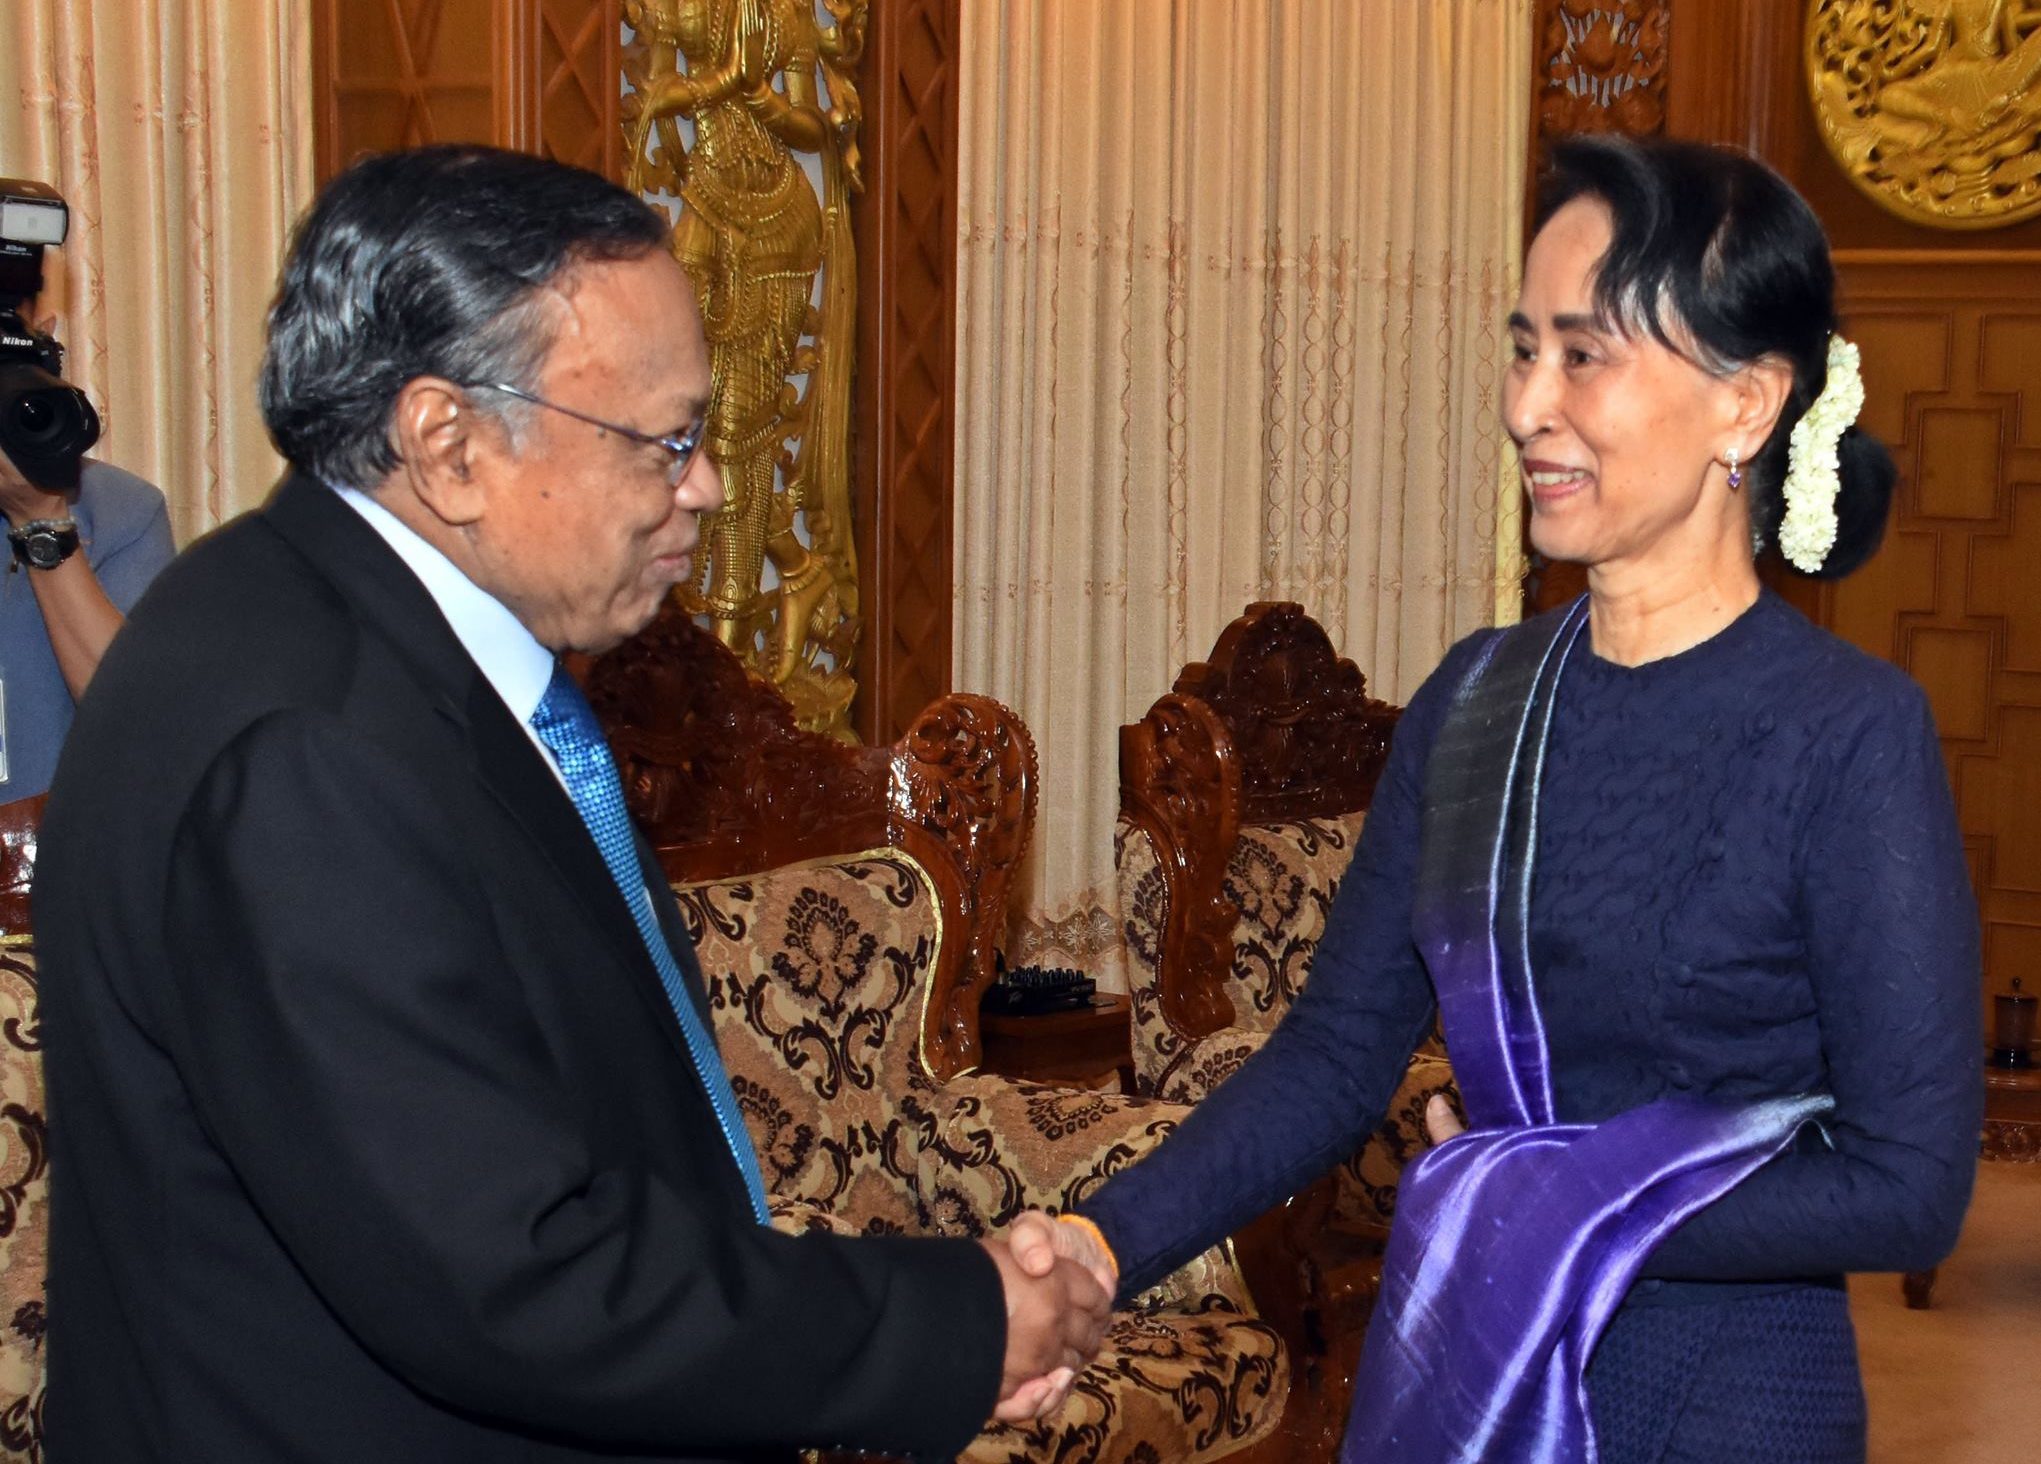 State Counsellor Aung San Suu Kyi meets Bangladeshi Foreign Minister A.H. Mahmood Ali on November 24, 2017. Photo: Facebook / Myanmar State Counsellor Office